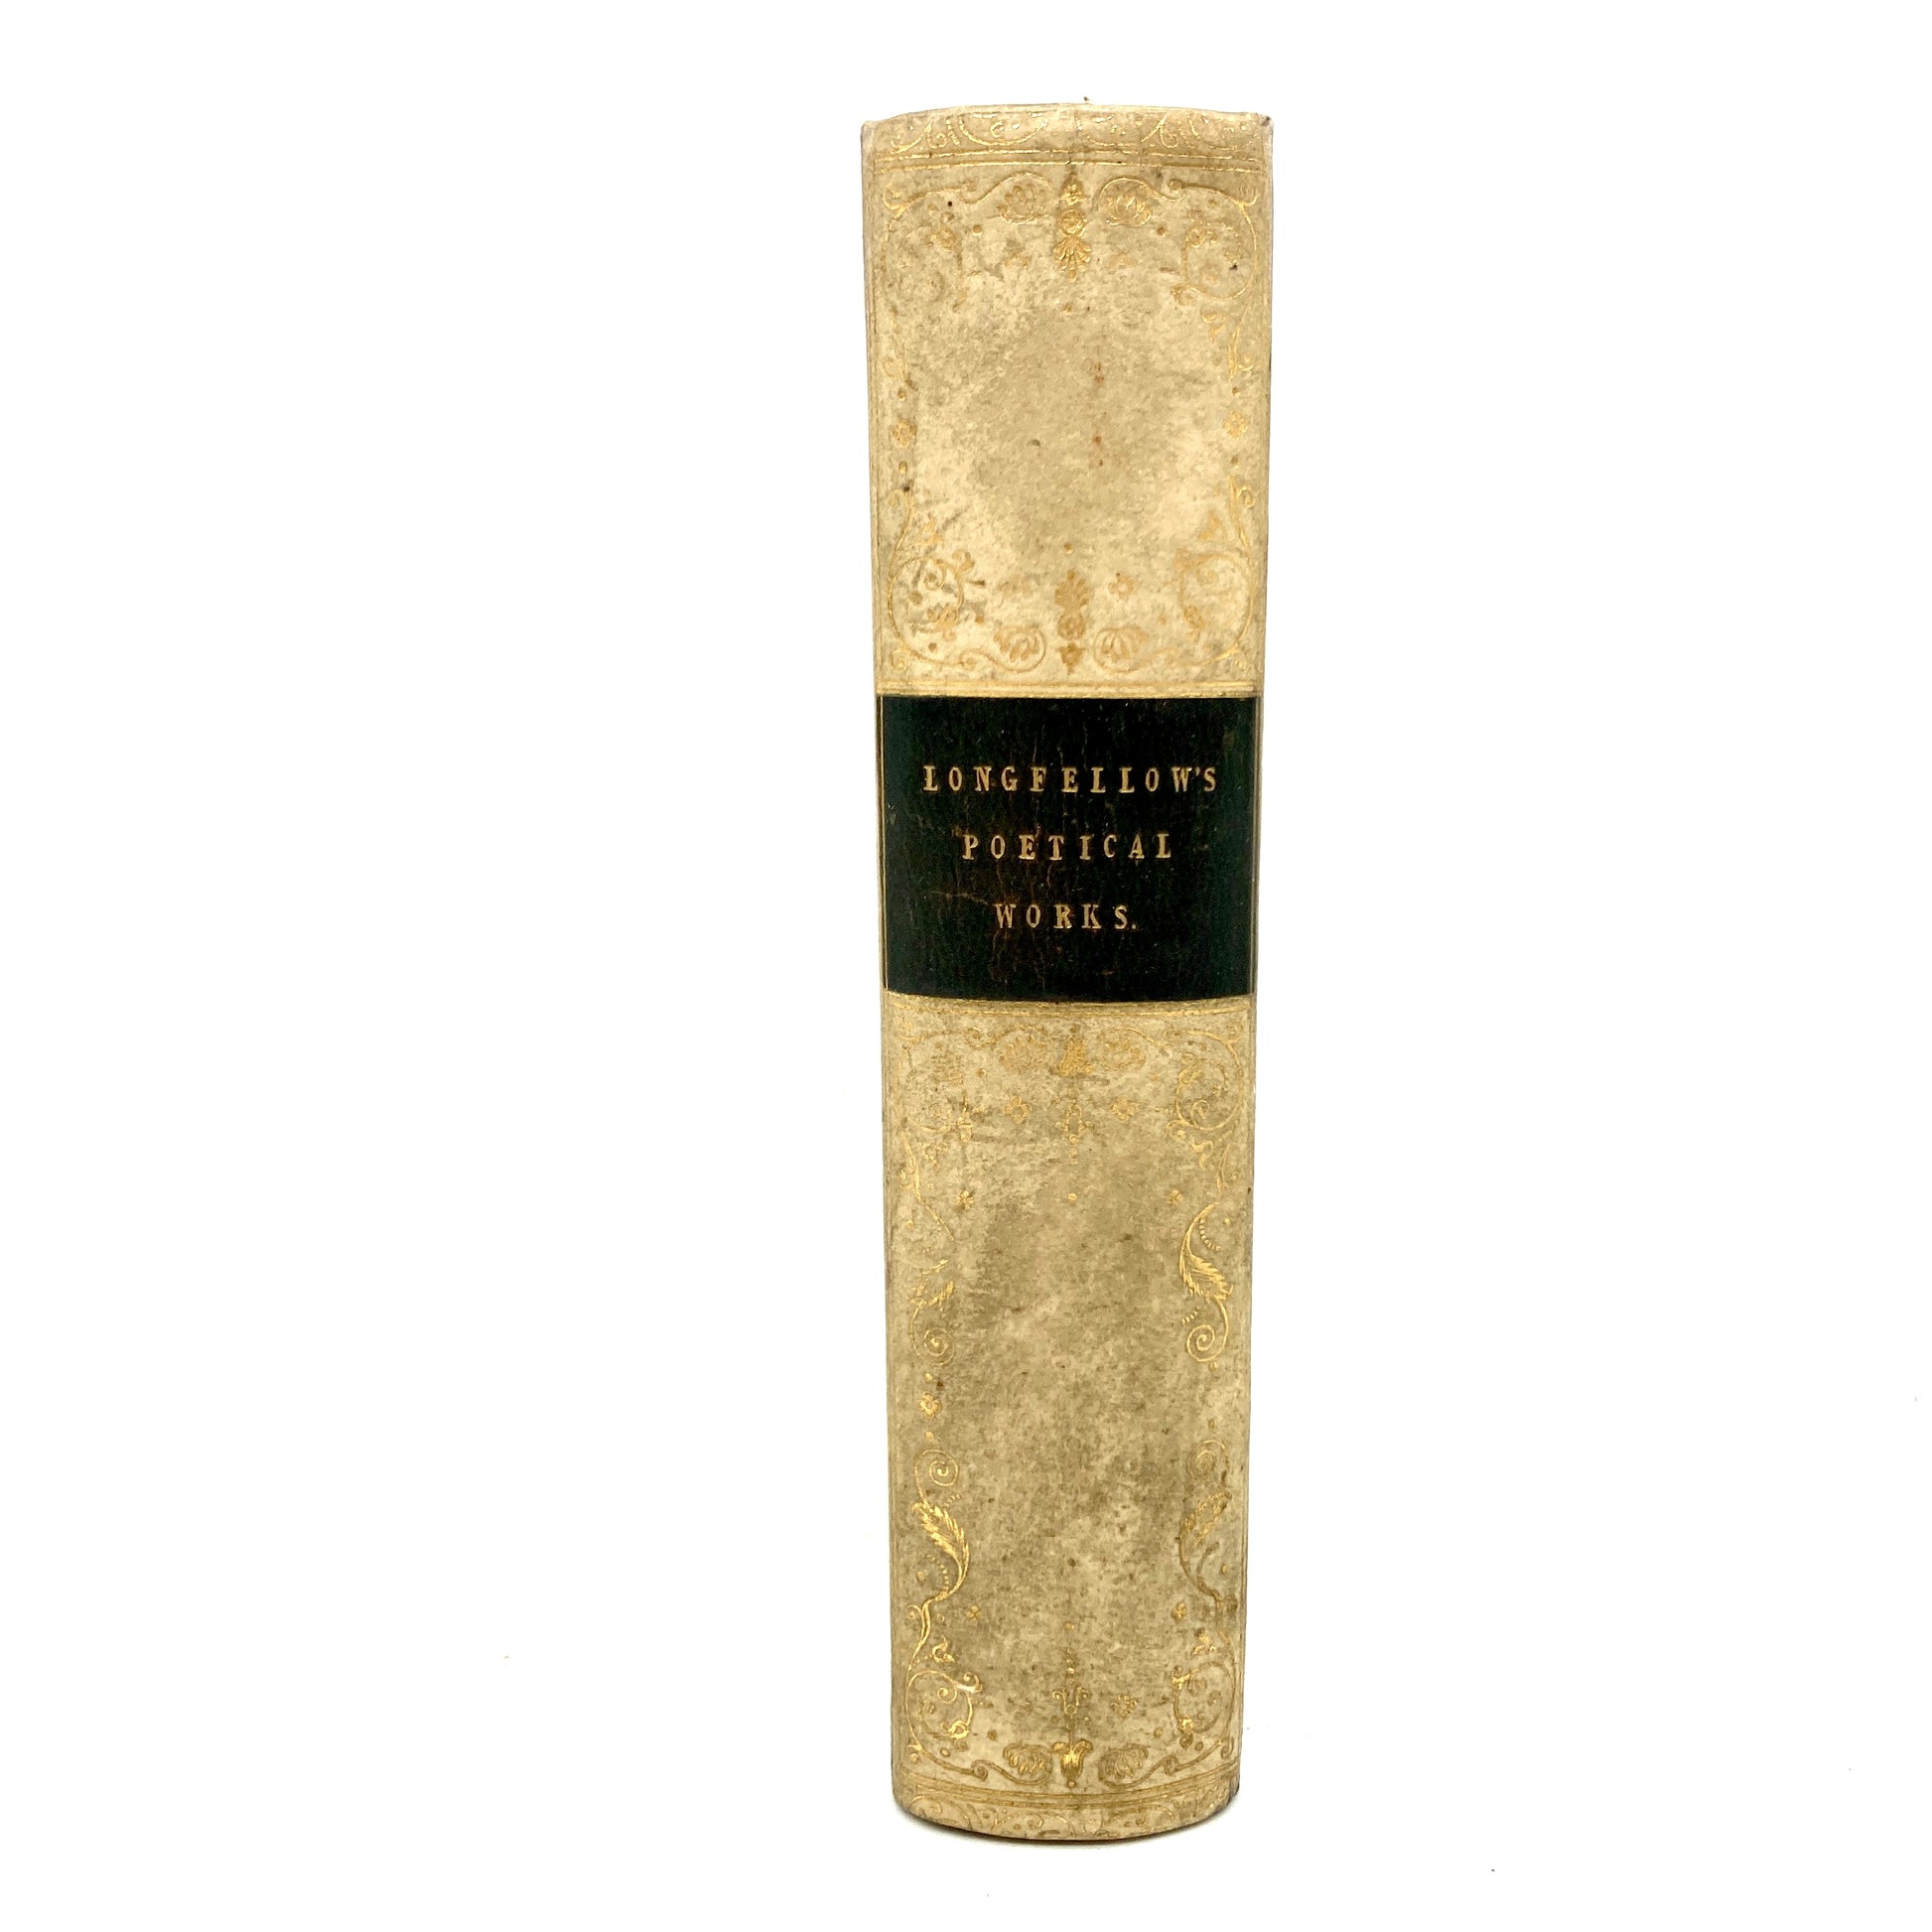 LONGFELLOW, Henry Wadsworth "The Poetical Works" [David Bogue, 1851] White Calf Leather - Buzz Bookstore